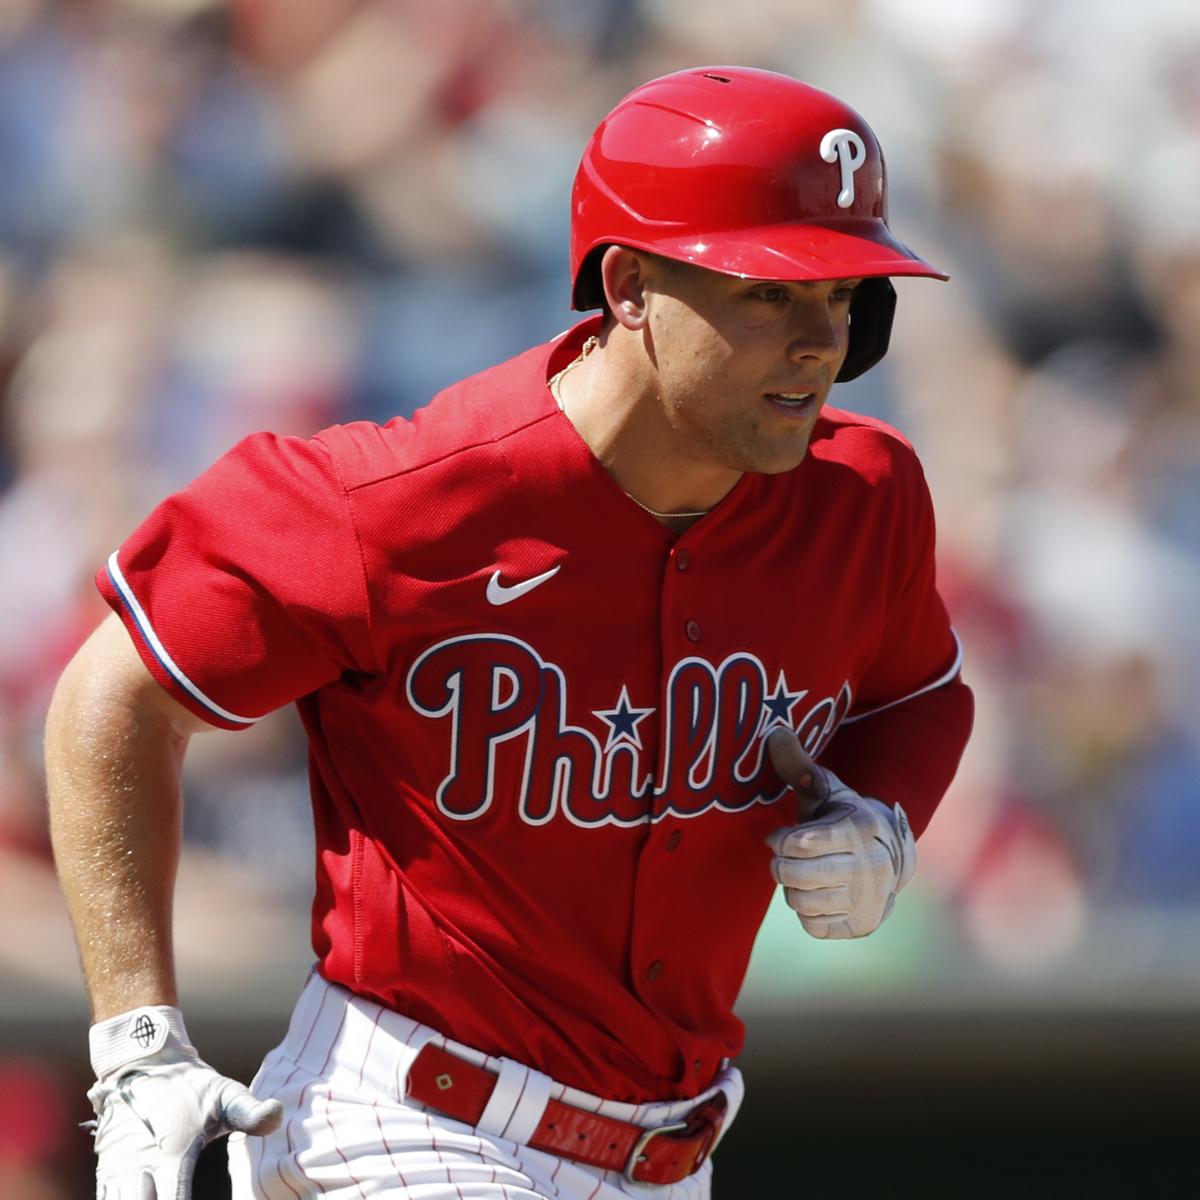 Phillies Plan Scott Kingery, Hector Neris, Extra on IL with Unspecified Accidents